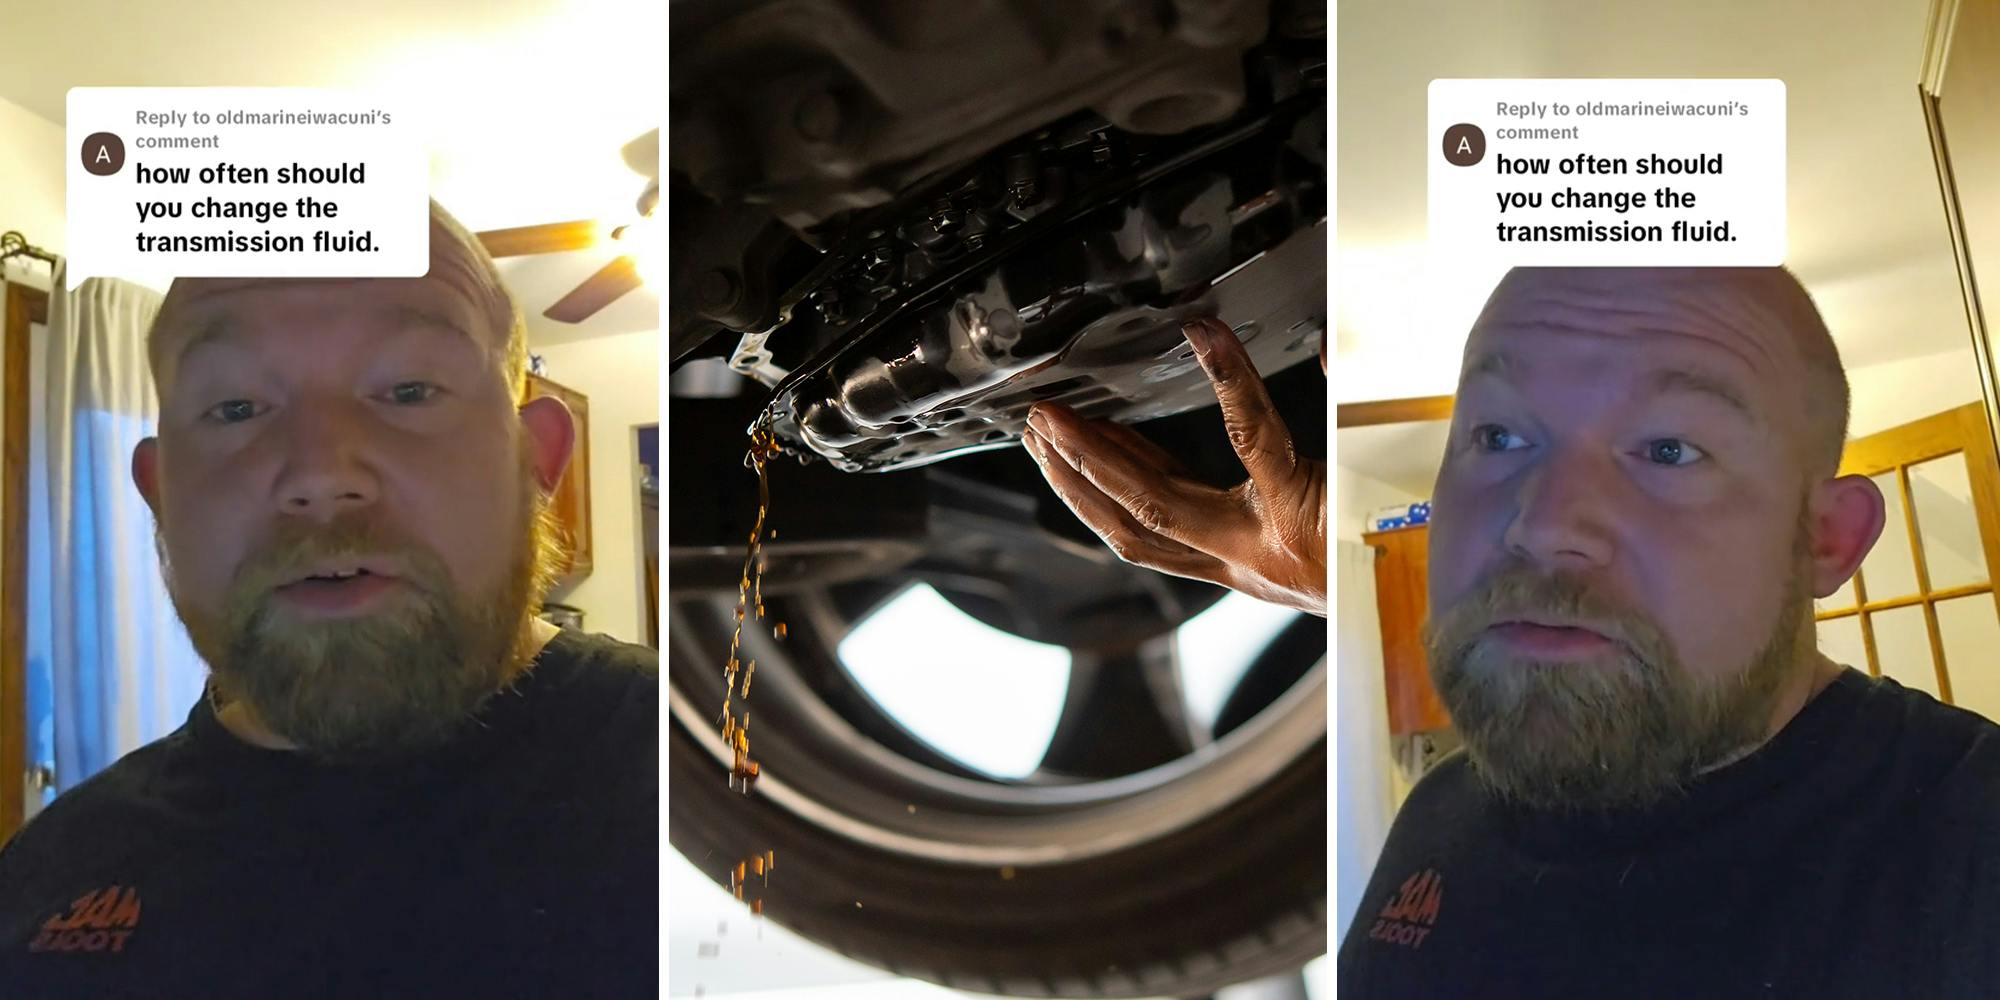 ‘There’s 3 different types of situations here’: Mechanic reveals how often you need to change your transmission fluid